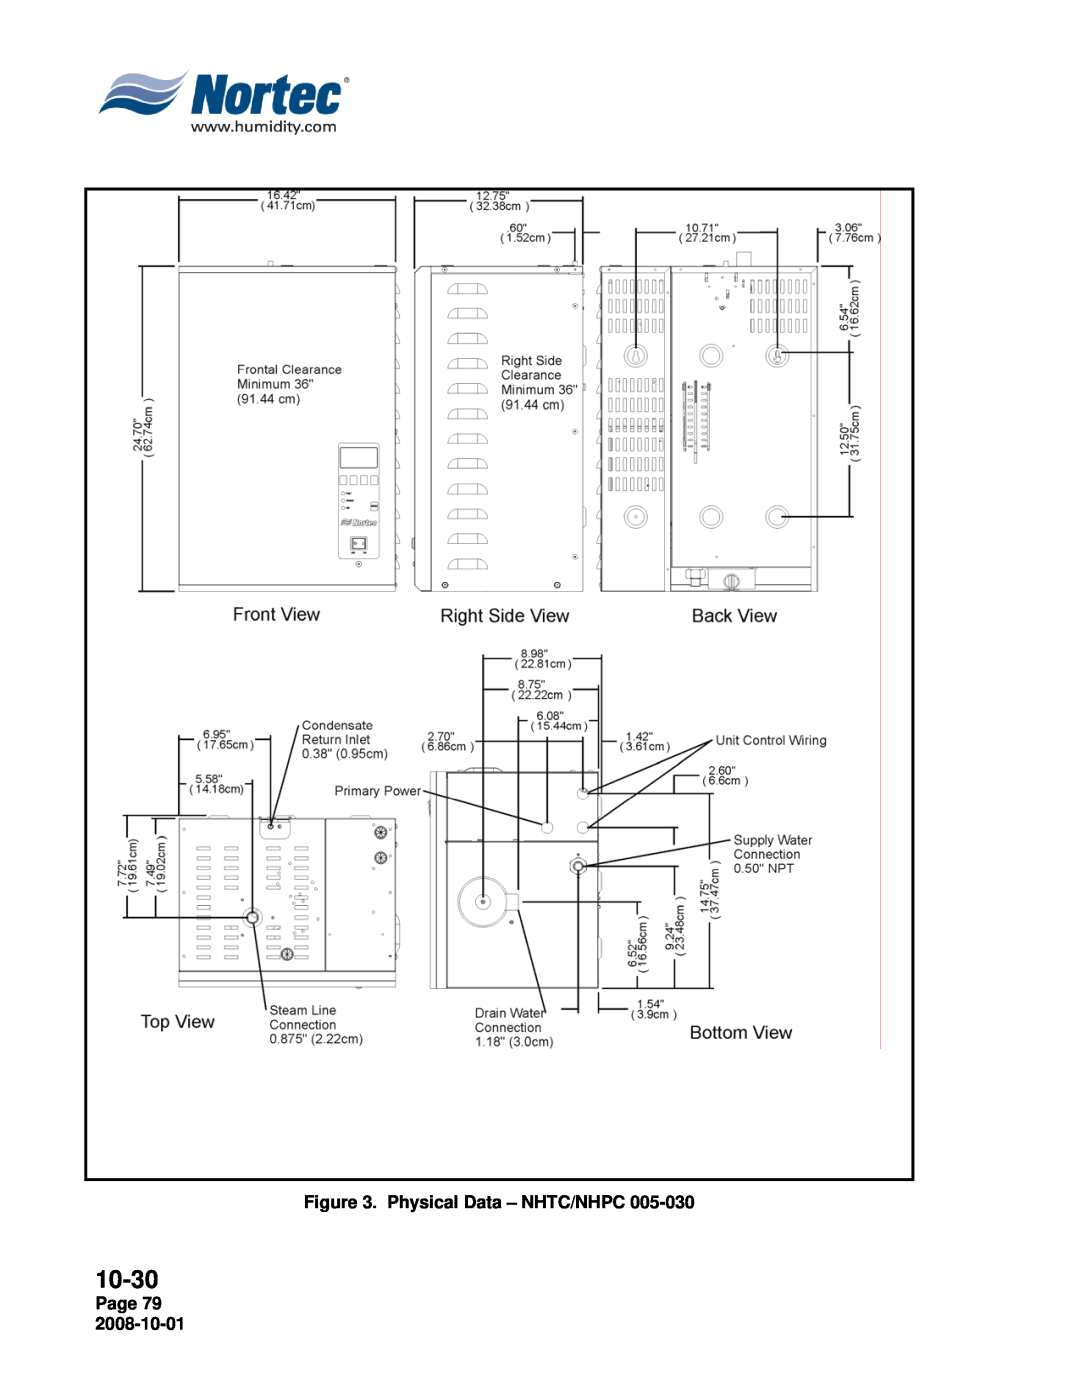 Nortec manual 10-30, Physical Data – NHTC/NHPC, Page 79 